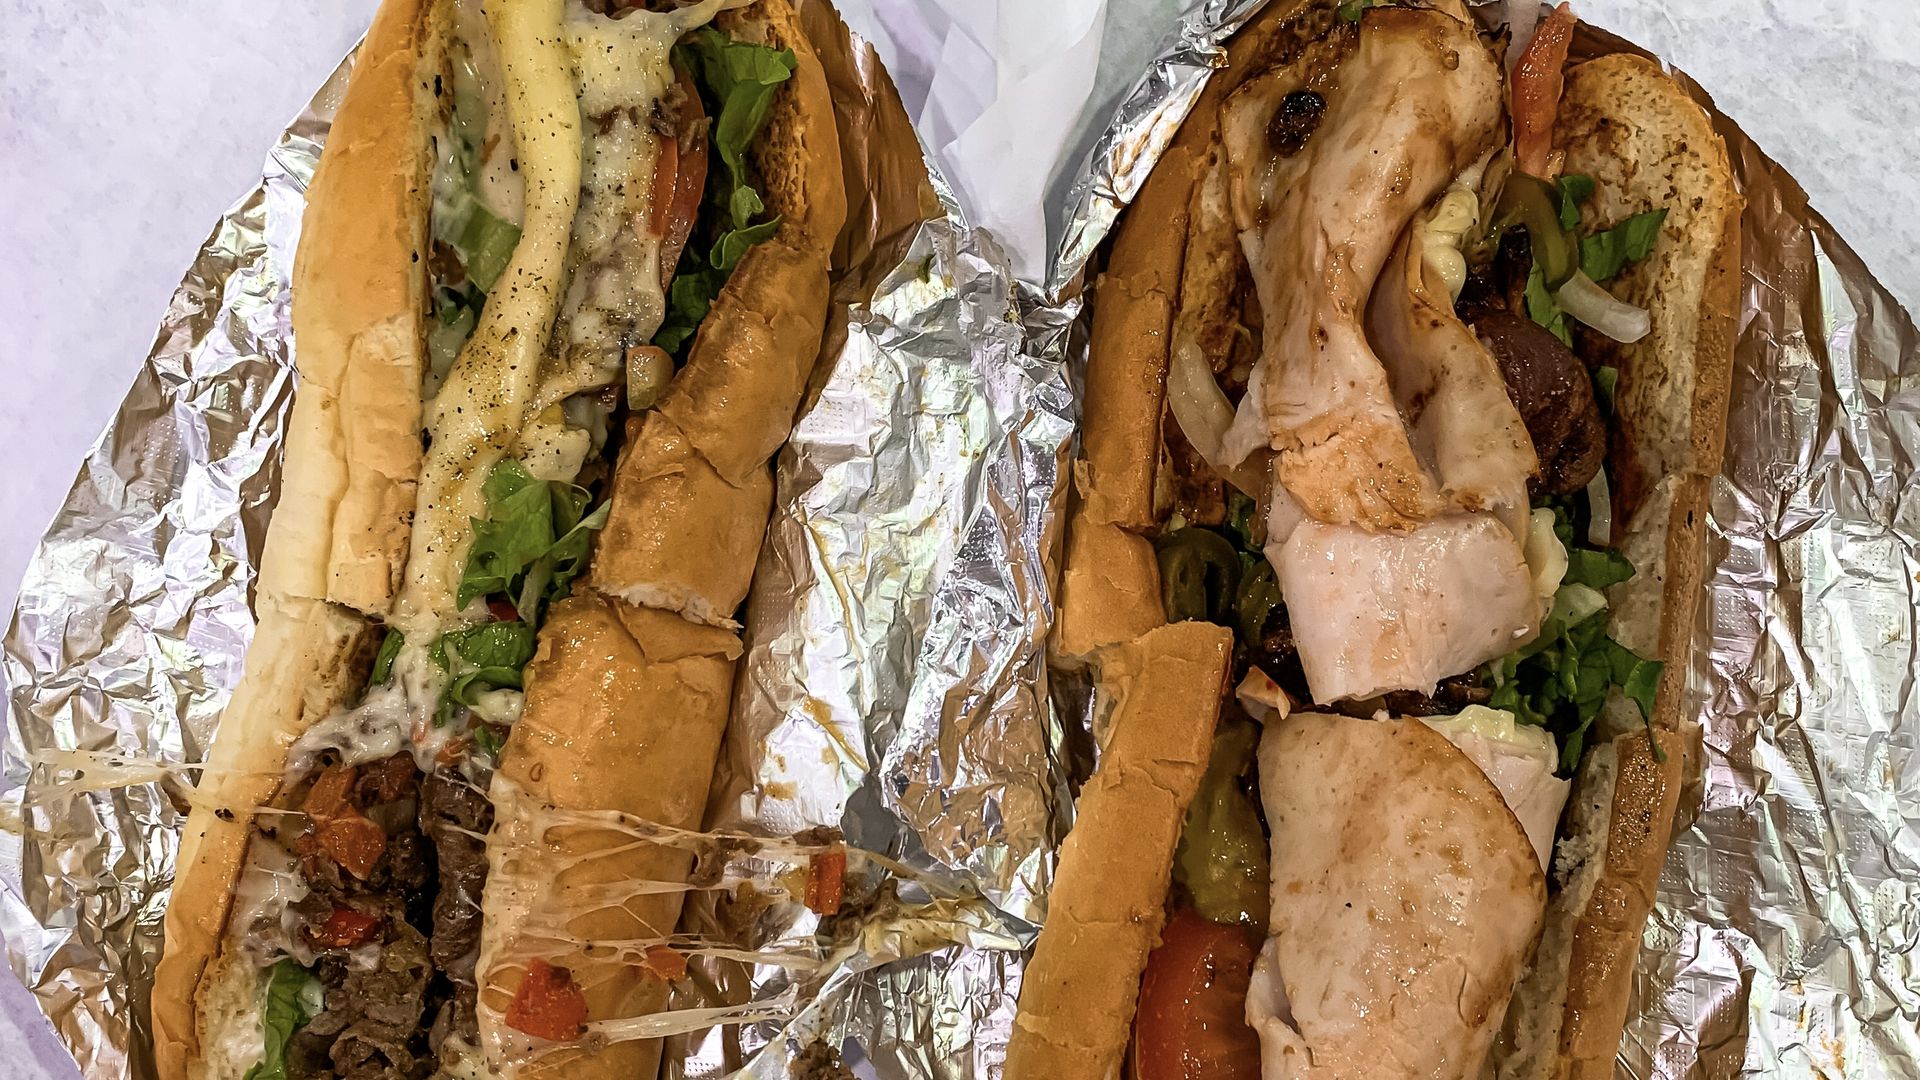 Two sandwiches, stuffed with deli meat and various toppings, sit on pieces of aluminum foil.